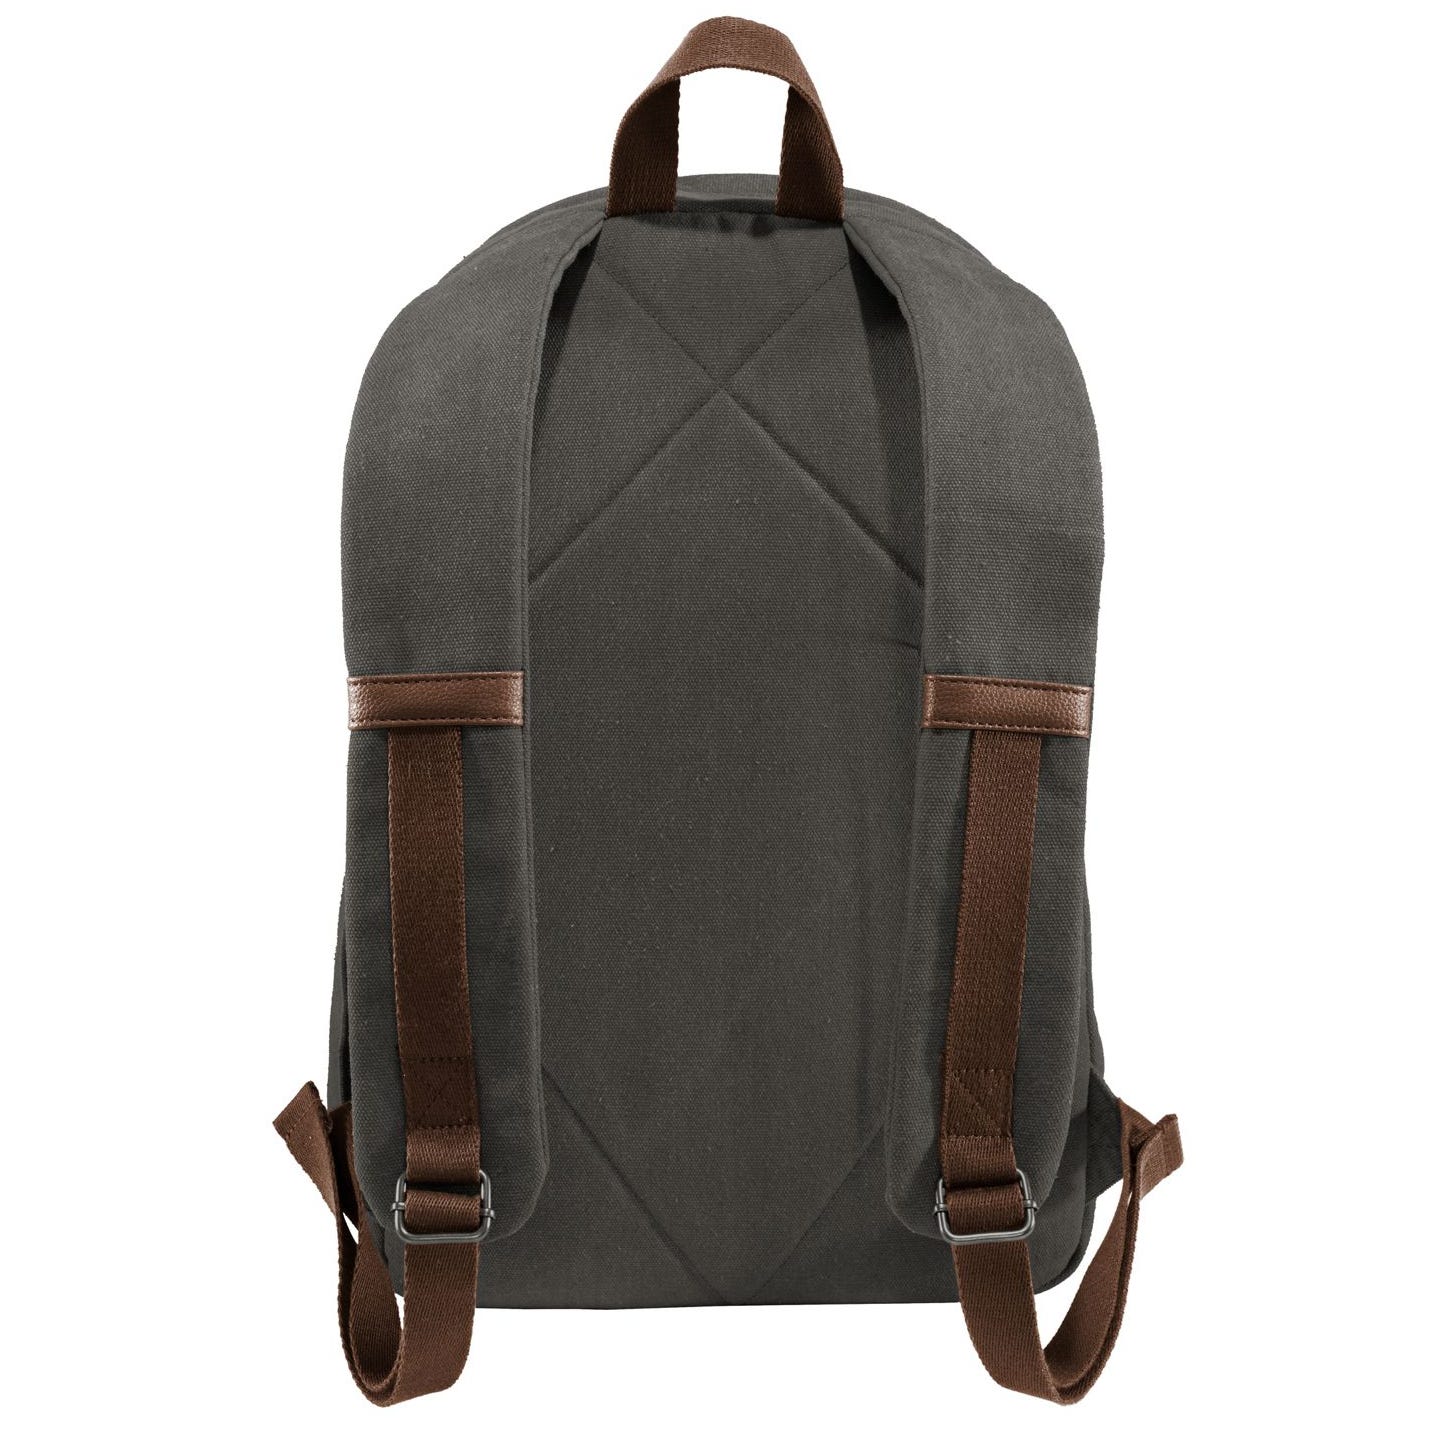 Funny 100th Birthday: It Took Me 100 Years To Look This Good Cotton Canvas Backpack